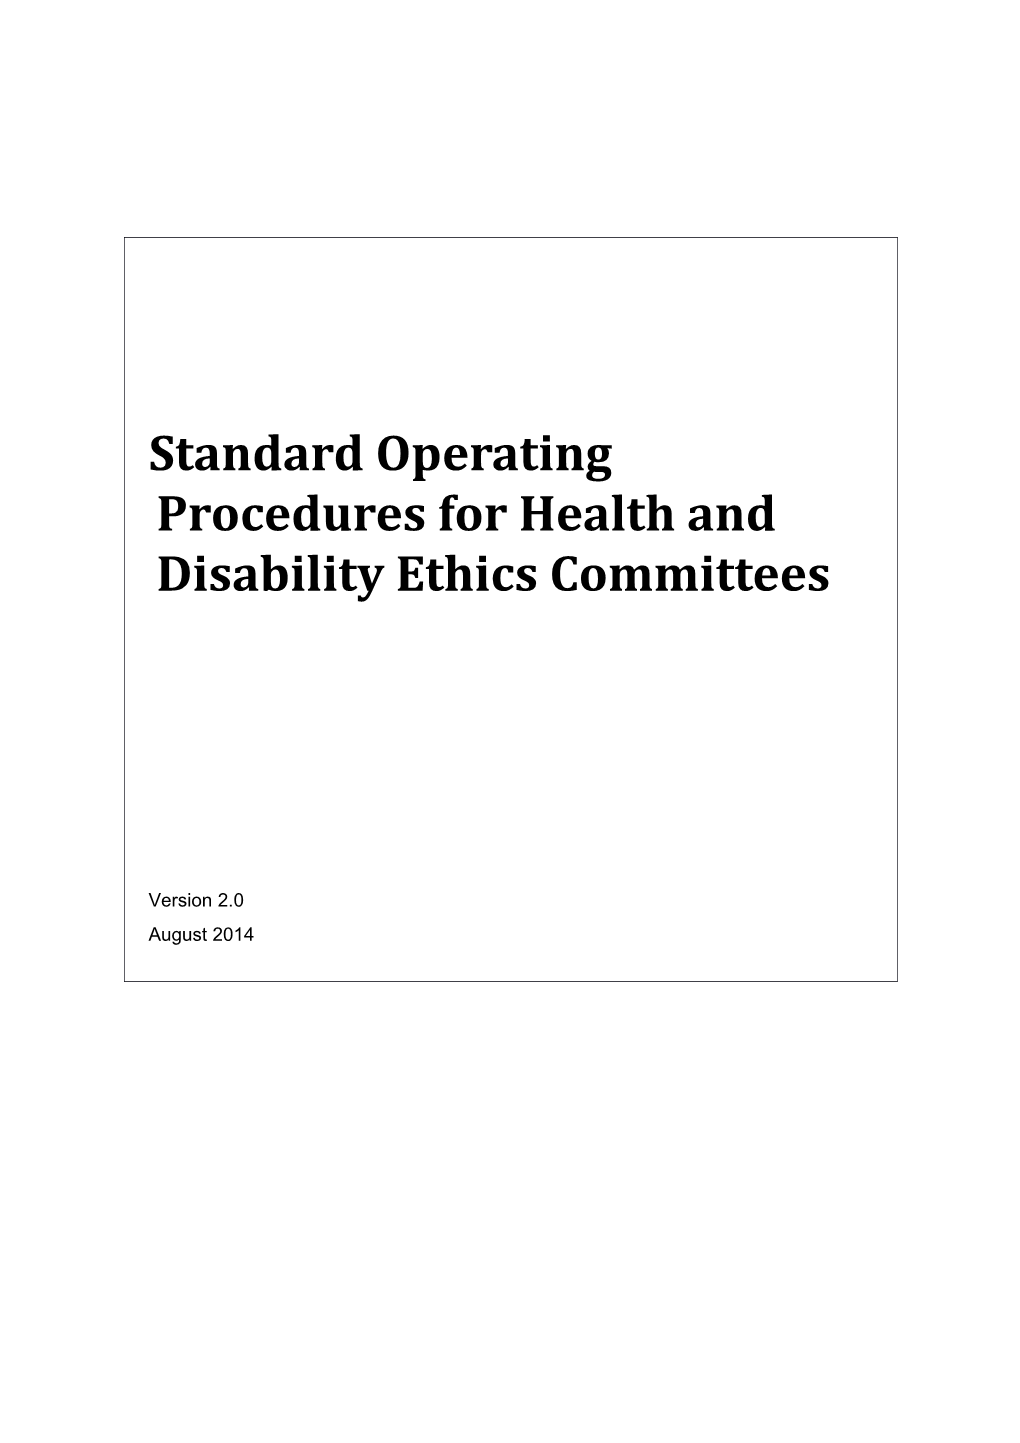 Standard Operating Procedures for Health and Disability Ethics Committees